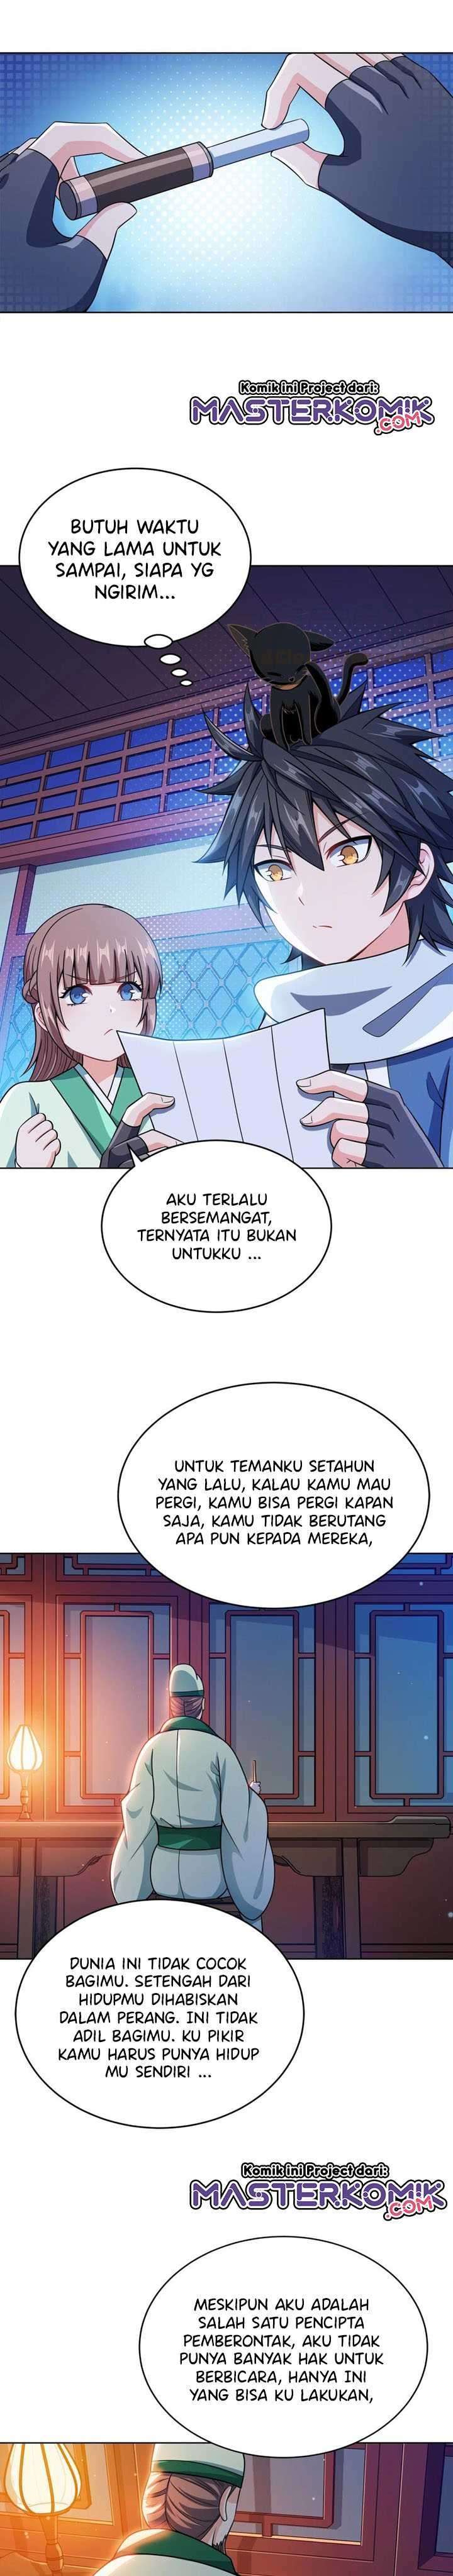 My Lady Is Actually the Empress? Chapter 29 Bahasa Indonesia